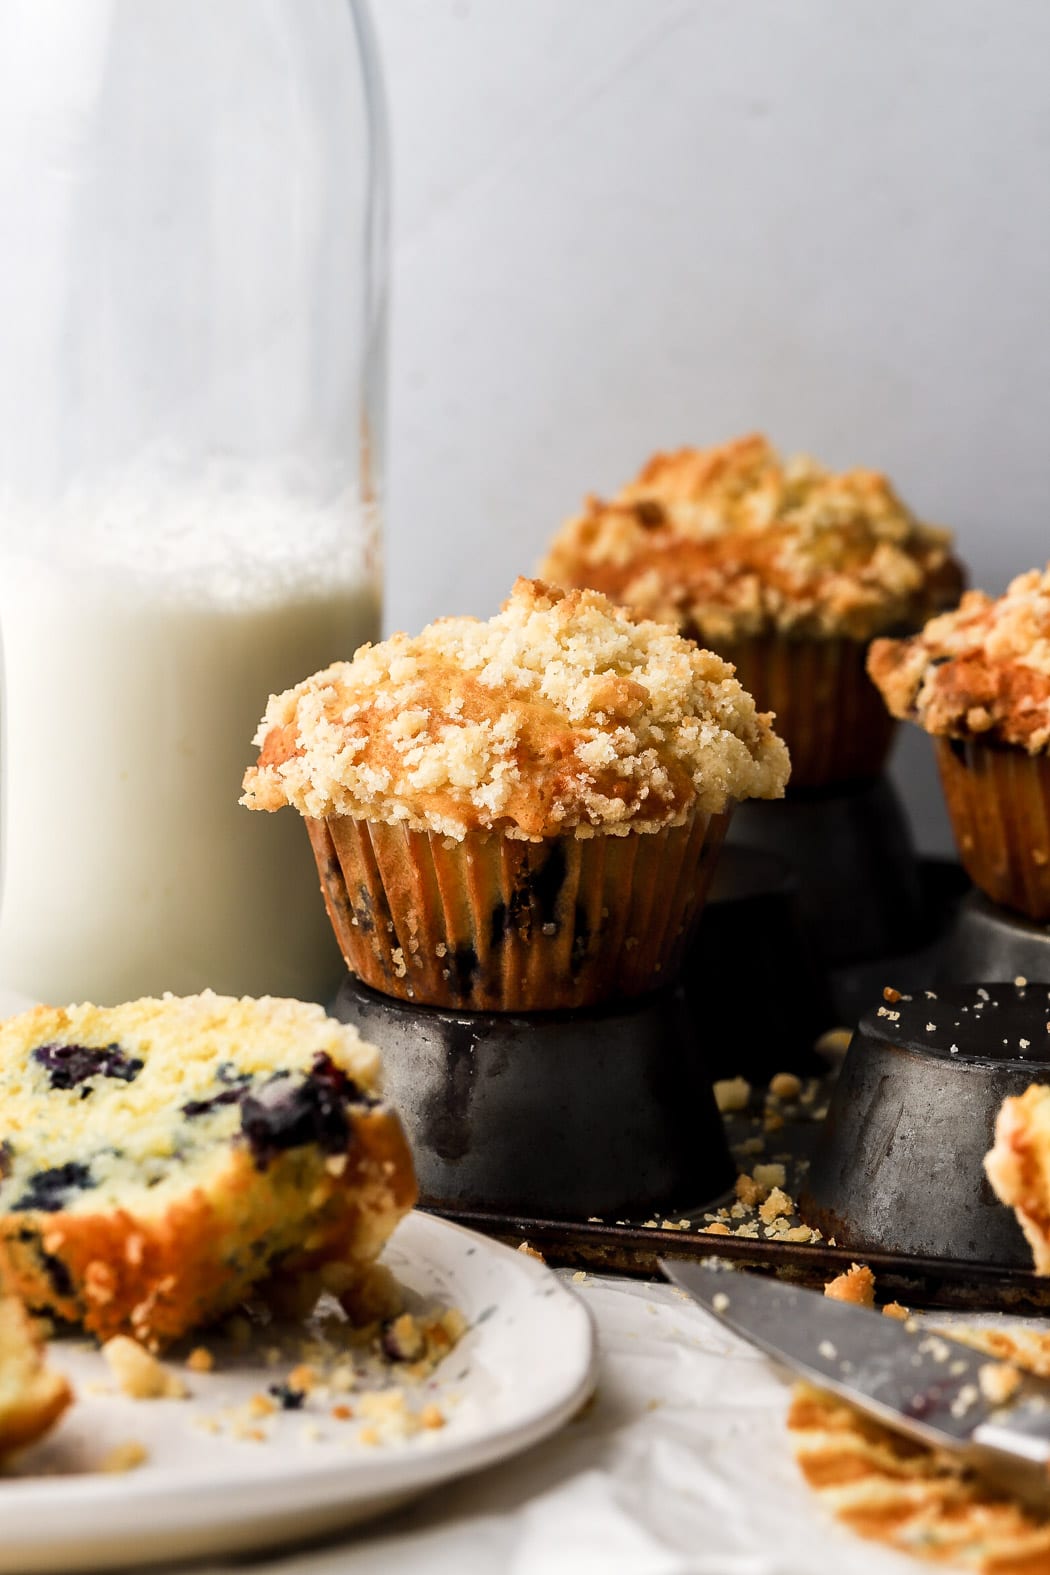 blueberry streusel muffin with white chocolate chips